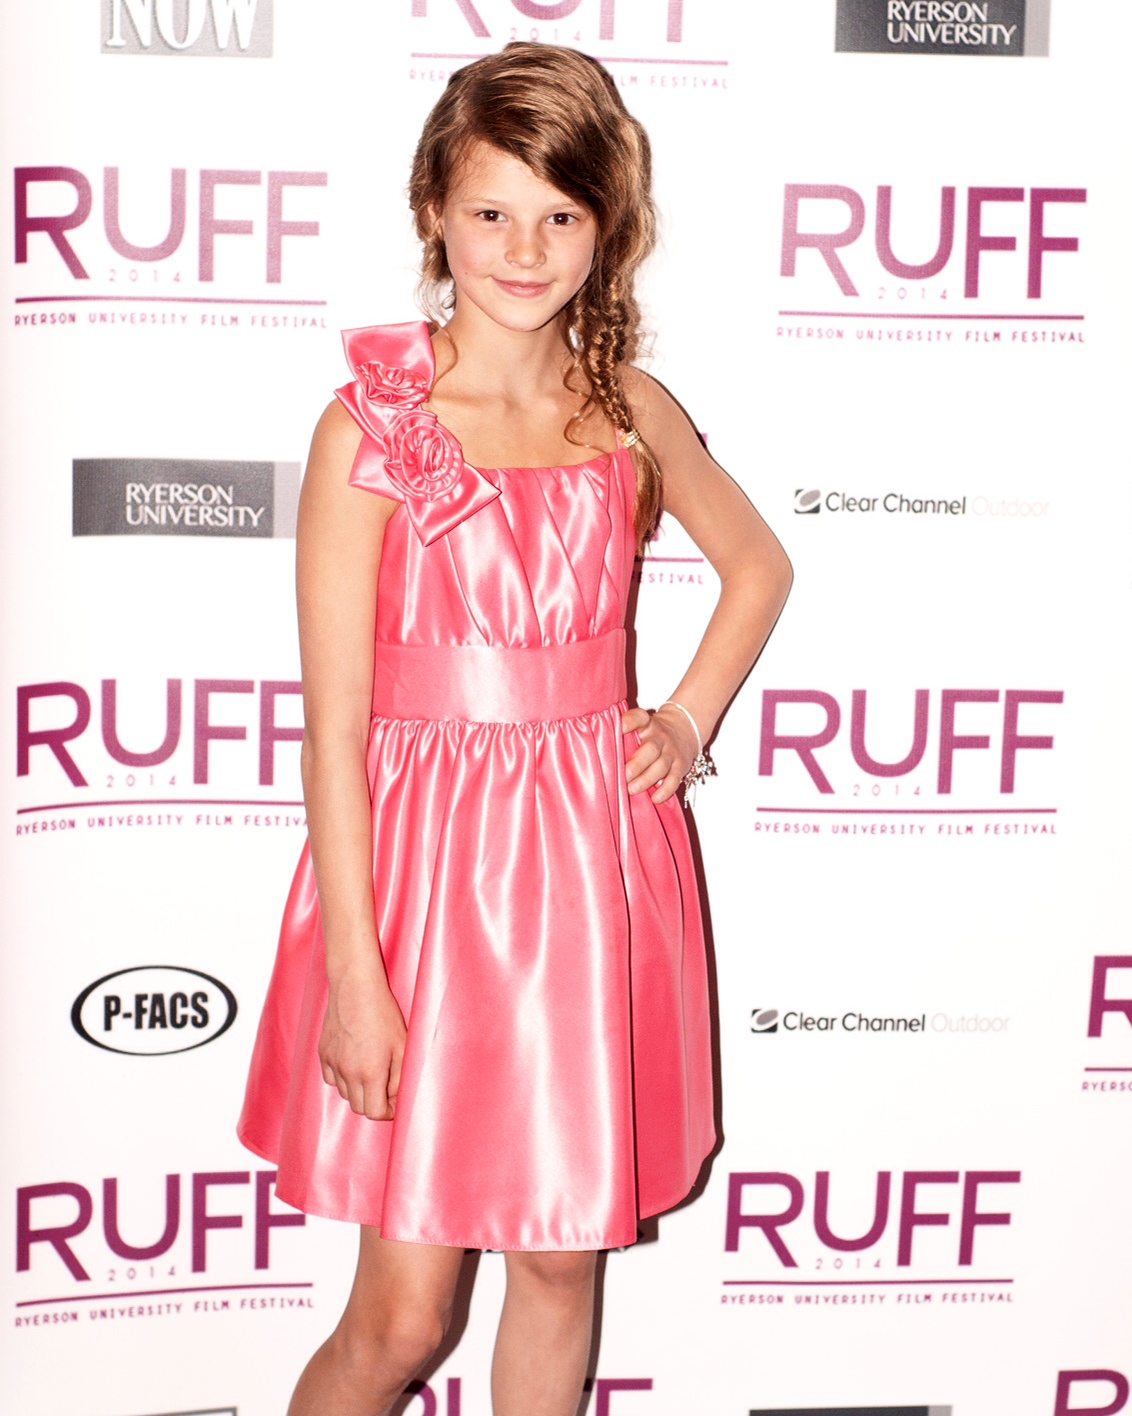 Peyton Kennedy at the premiere of Dorsal at the 2014 Ryerson University Film Festival (RUFF)